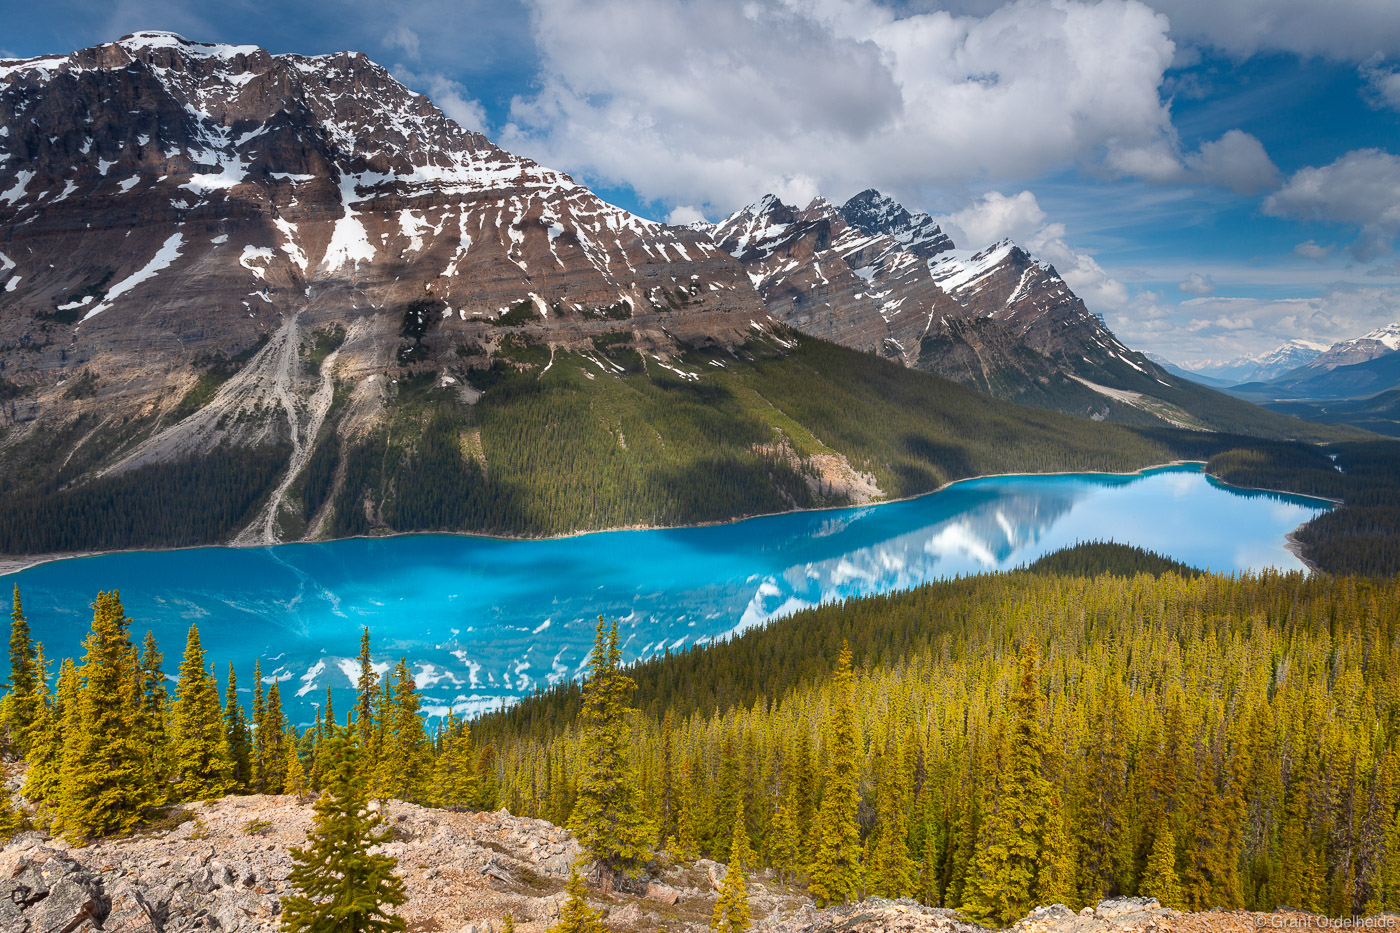 The glacier-fed Peyto&nbsp;Lake along the Icefields&nbsp;Parkway near&nbsp;Banff.